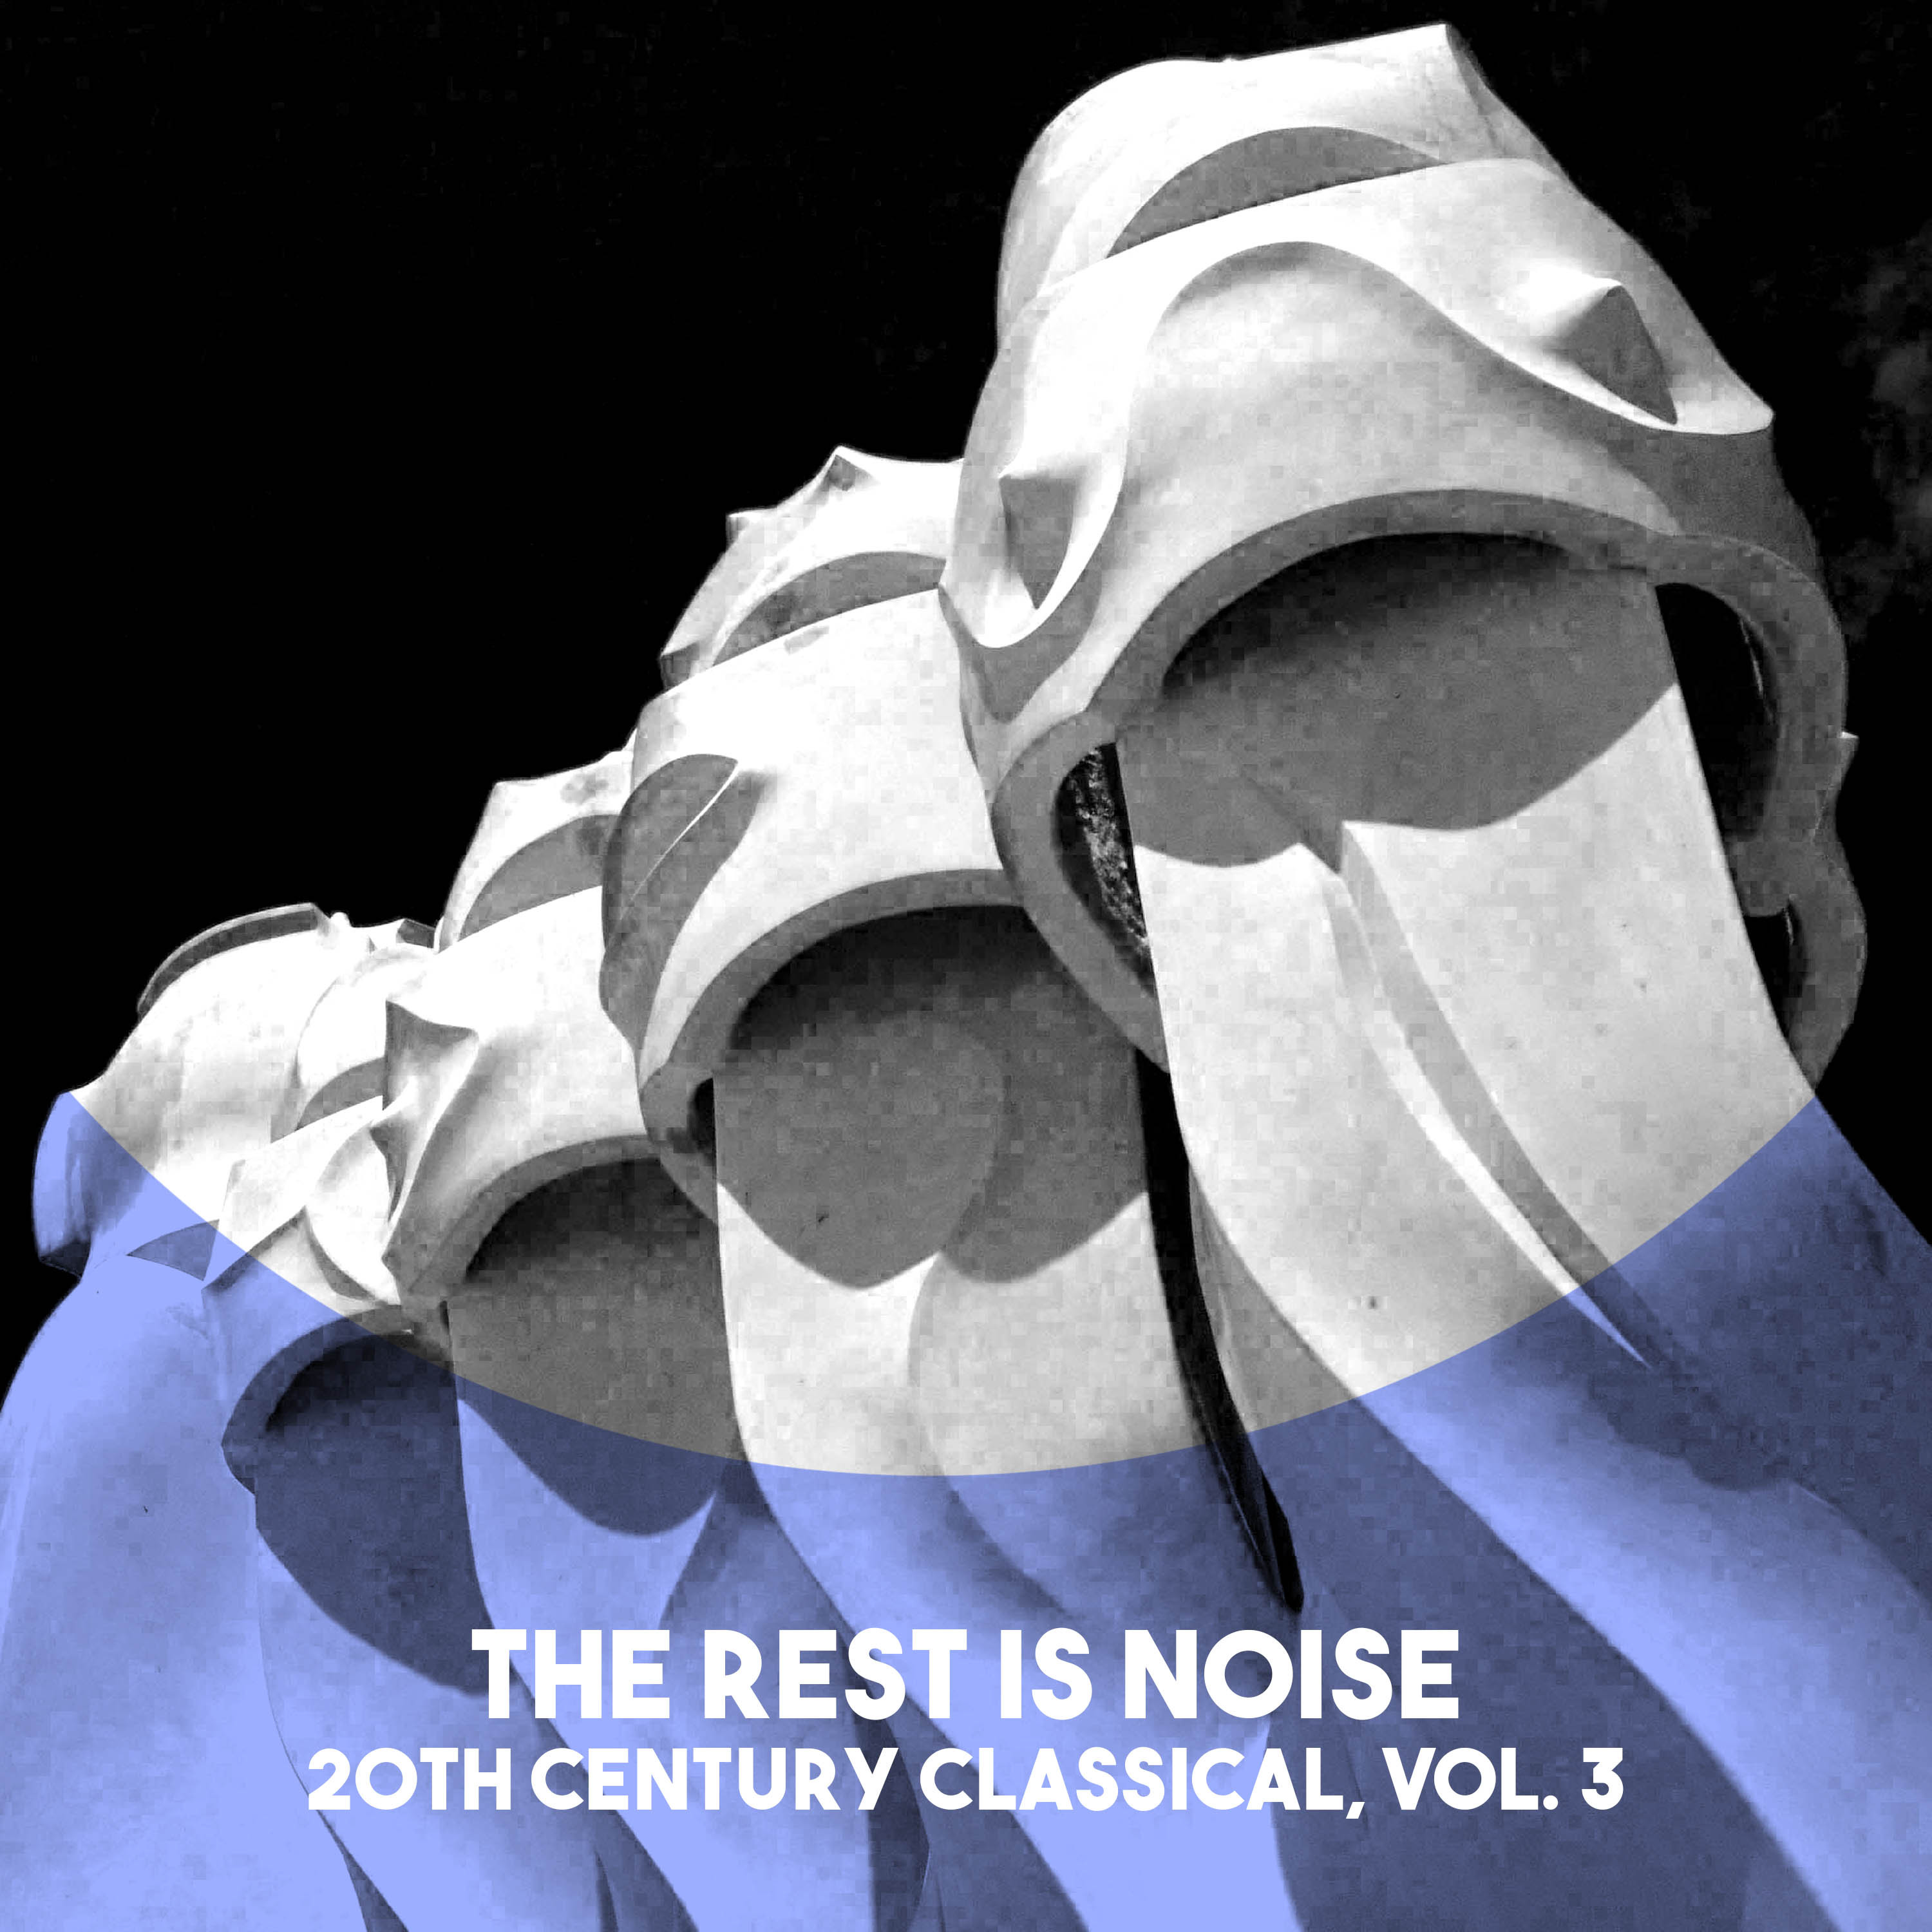 The Rest is Noise: 20th Century Classical, Vol. 3